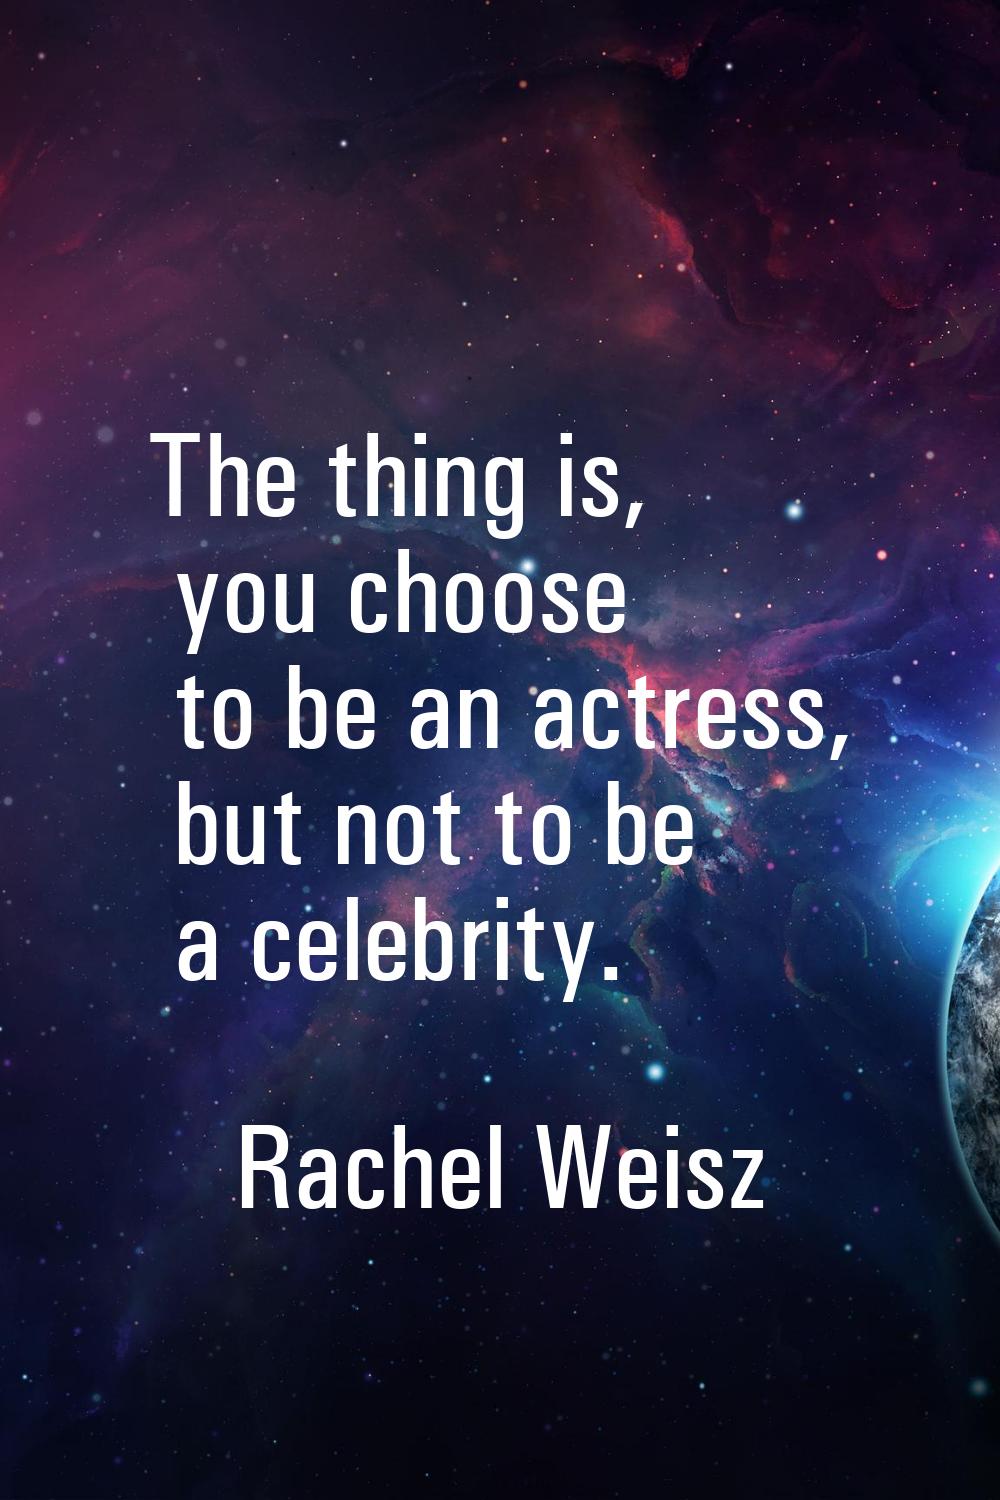 The thing is, you choose to be an actress, but not to be a celebrity.